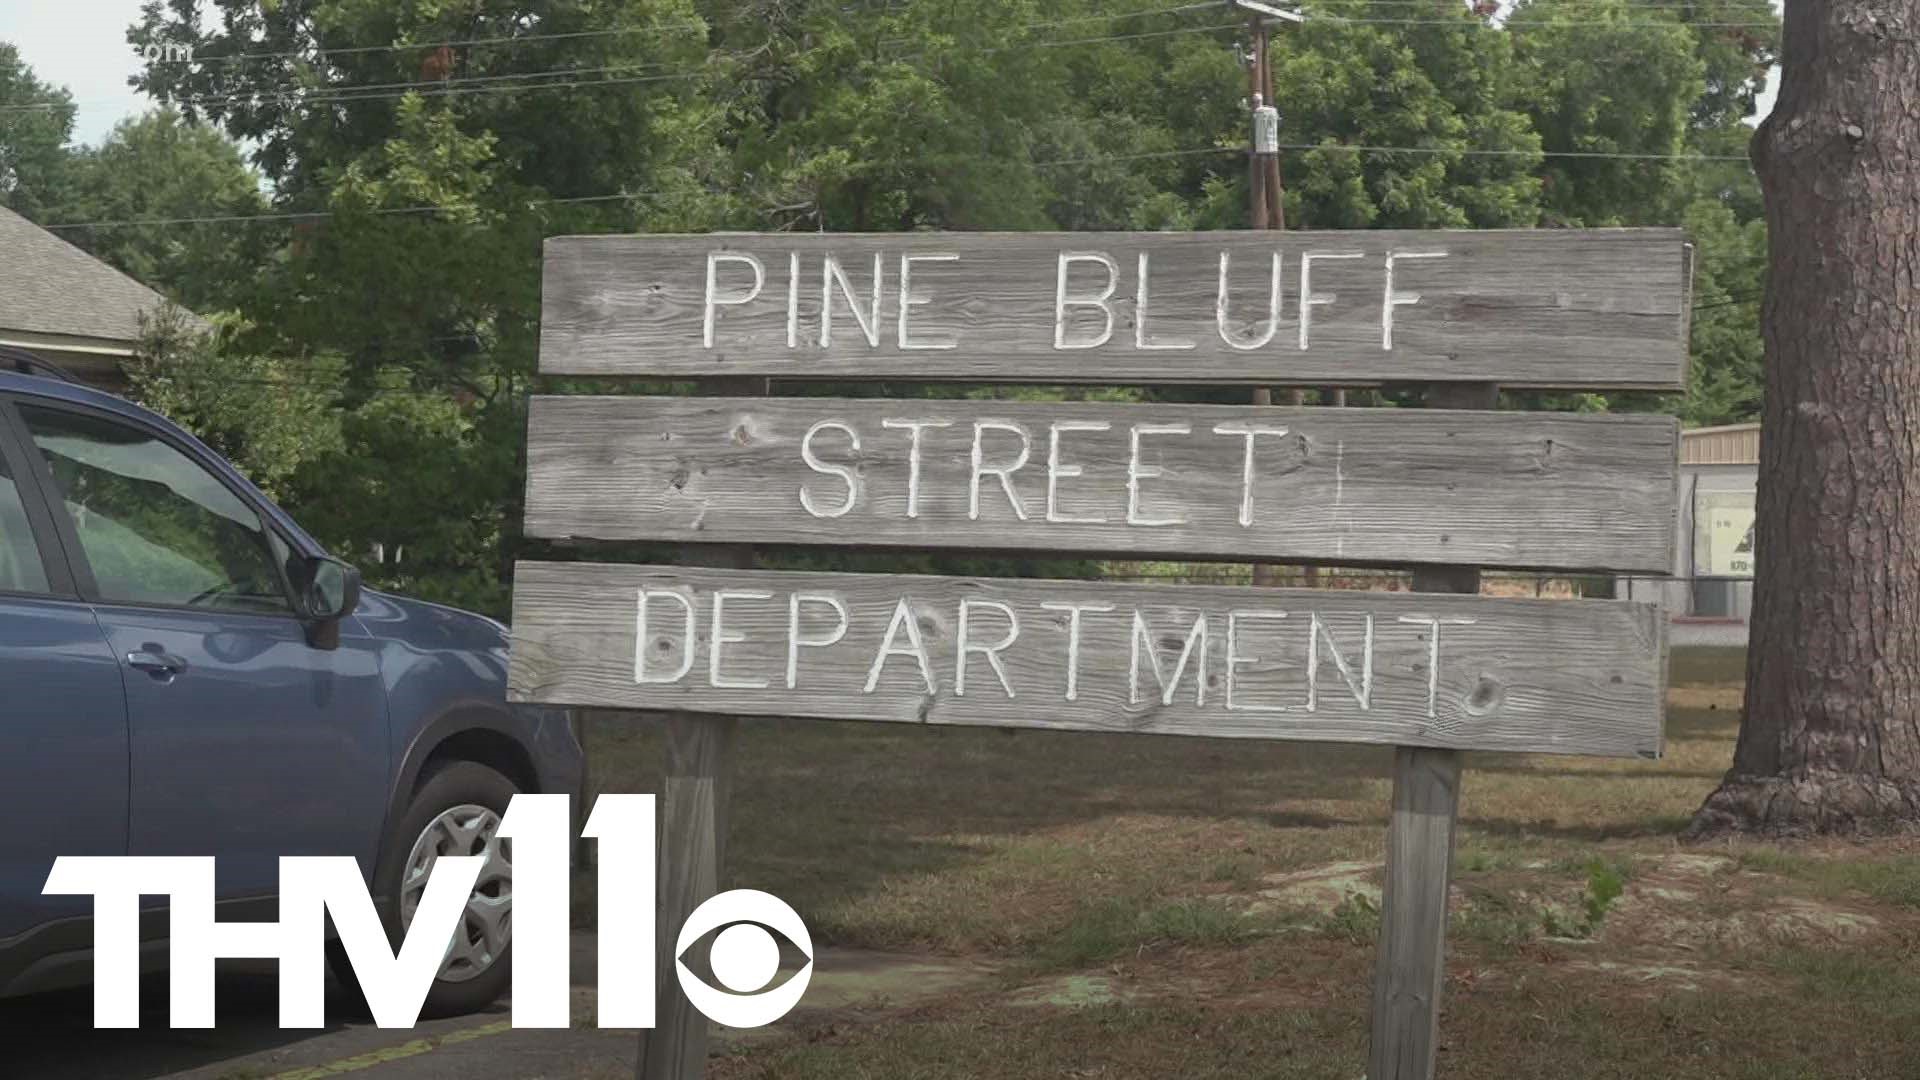 The Pine Bluff Street Department is developing an app that will make sending and responding to work orders easier for both residents and workers.